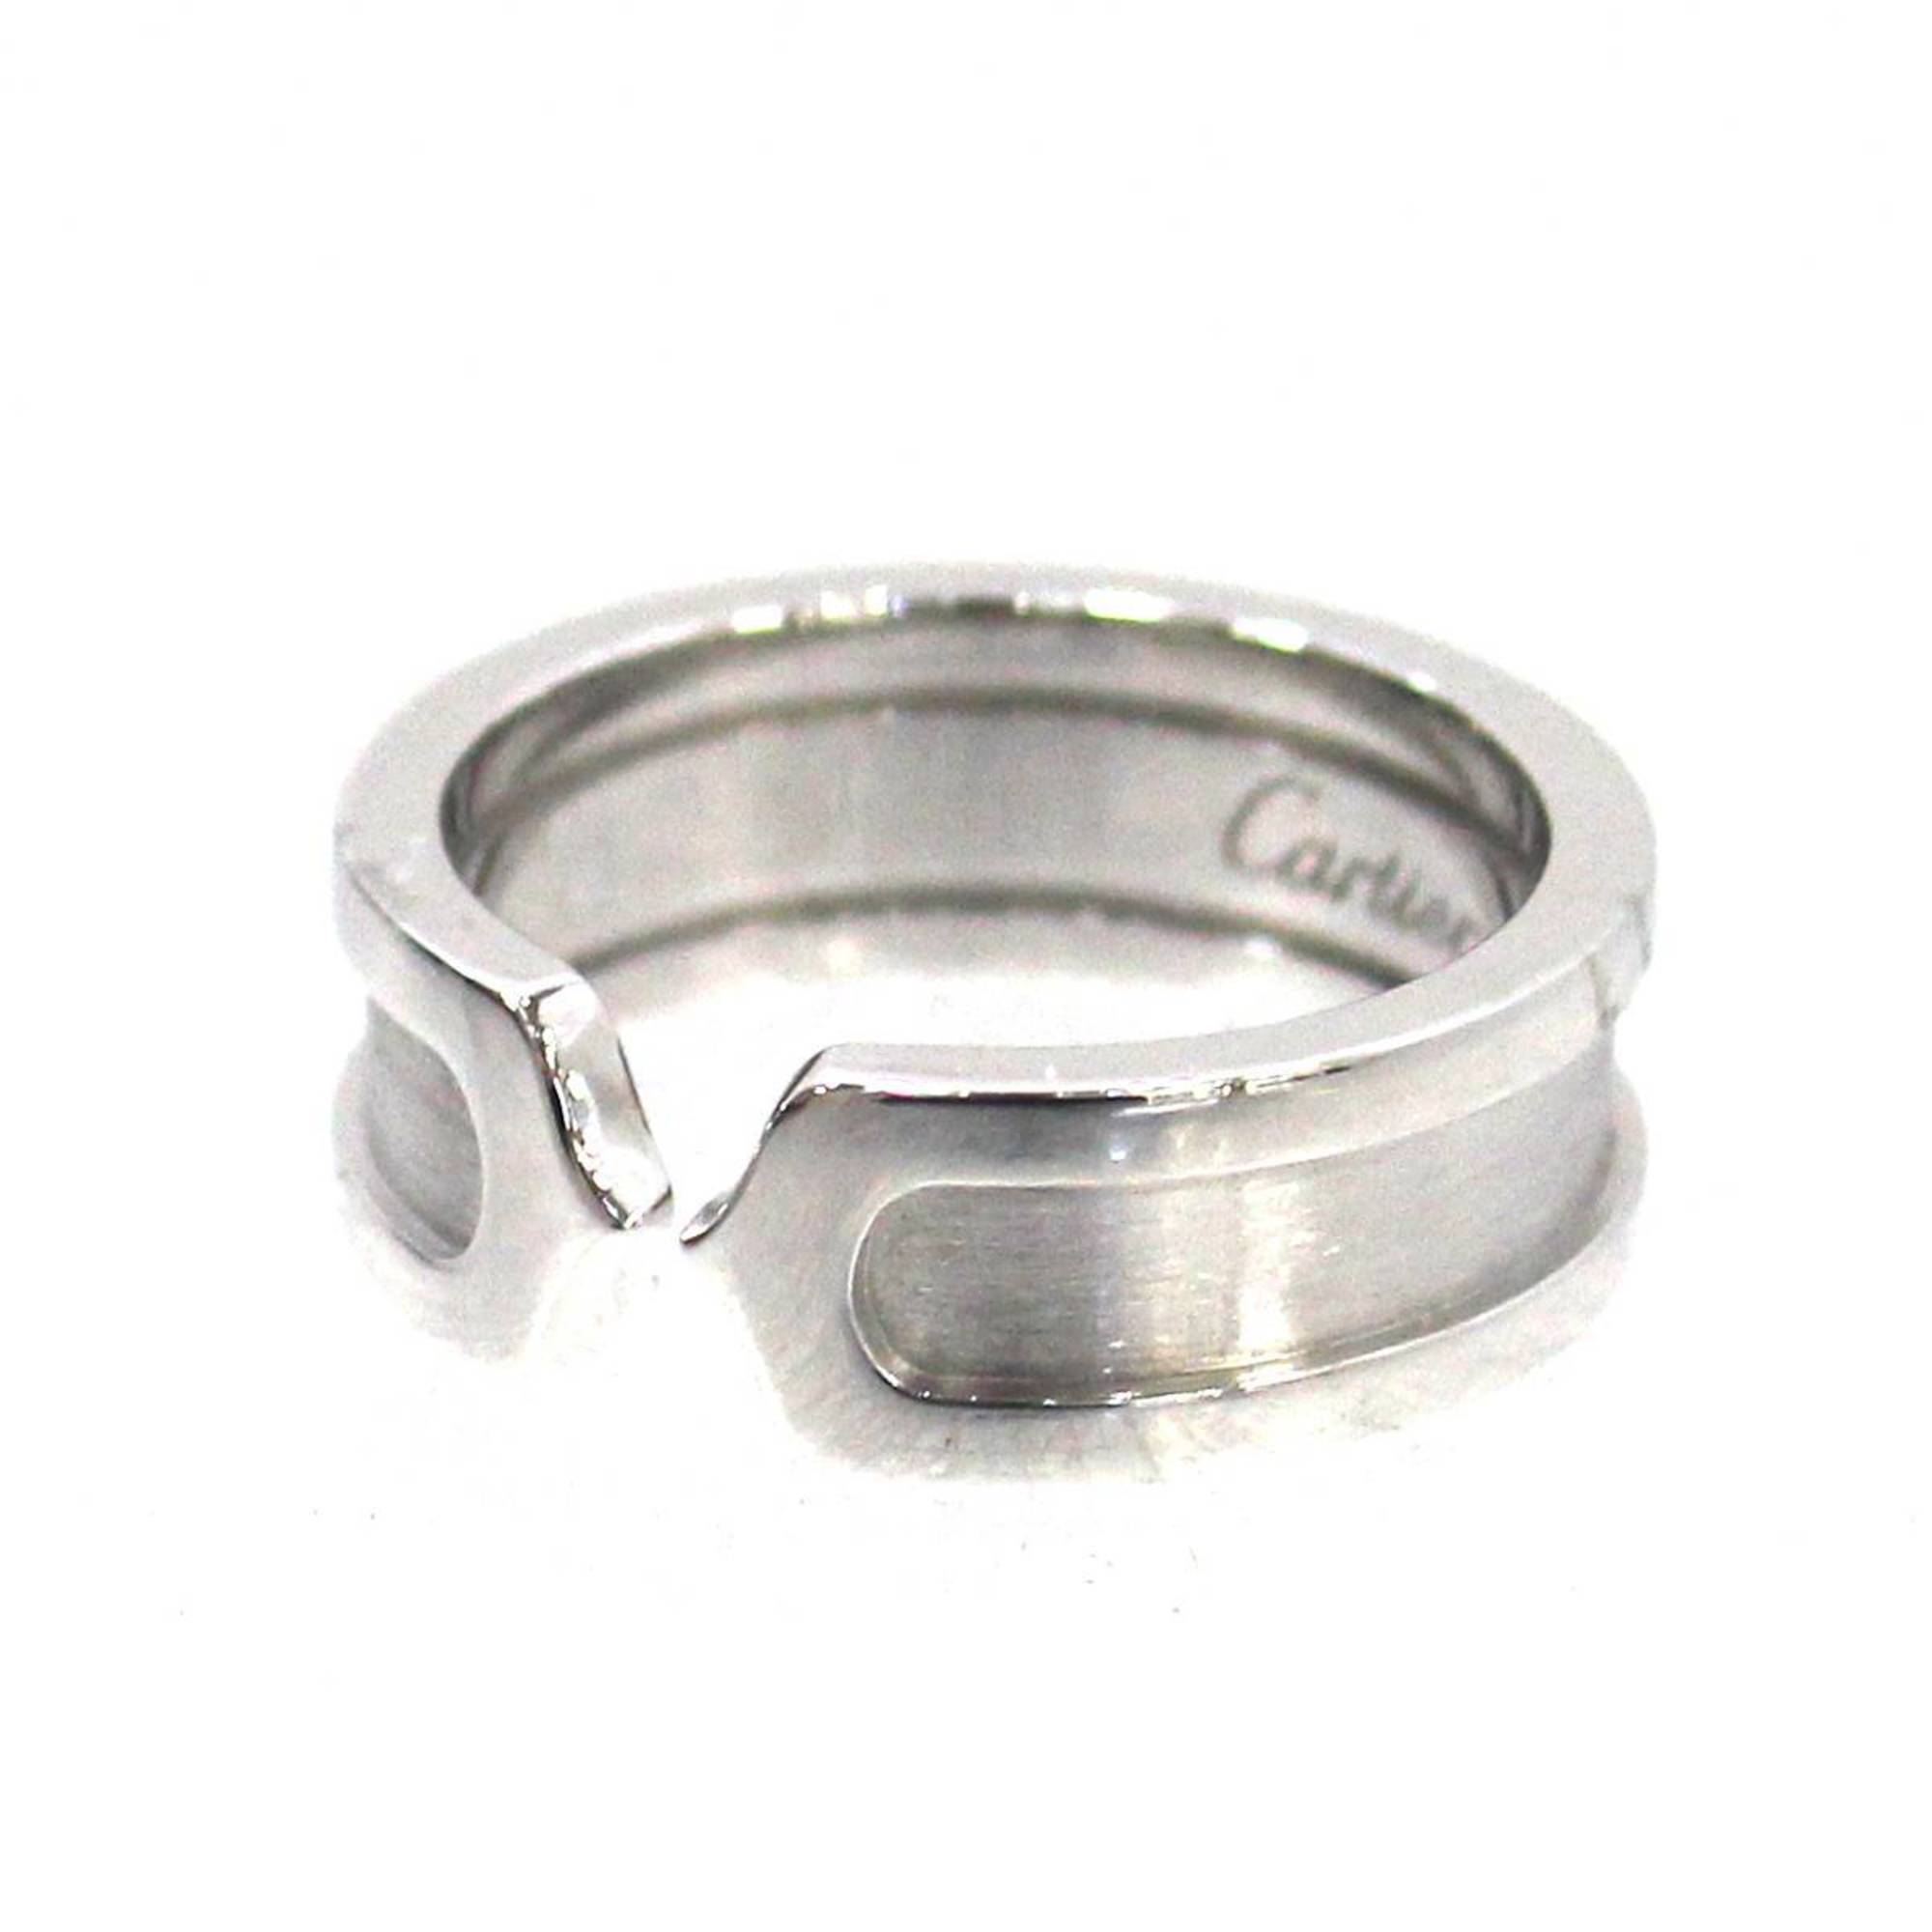 Cartier C2 Ring No. 10 750 K18WG Polished Product